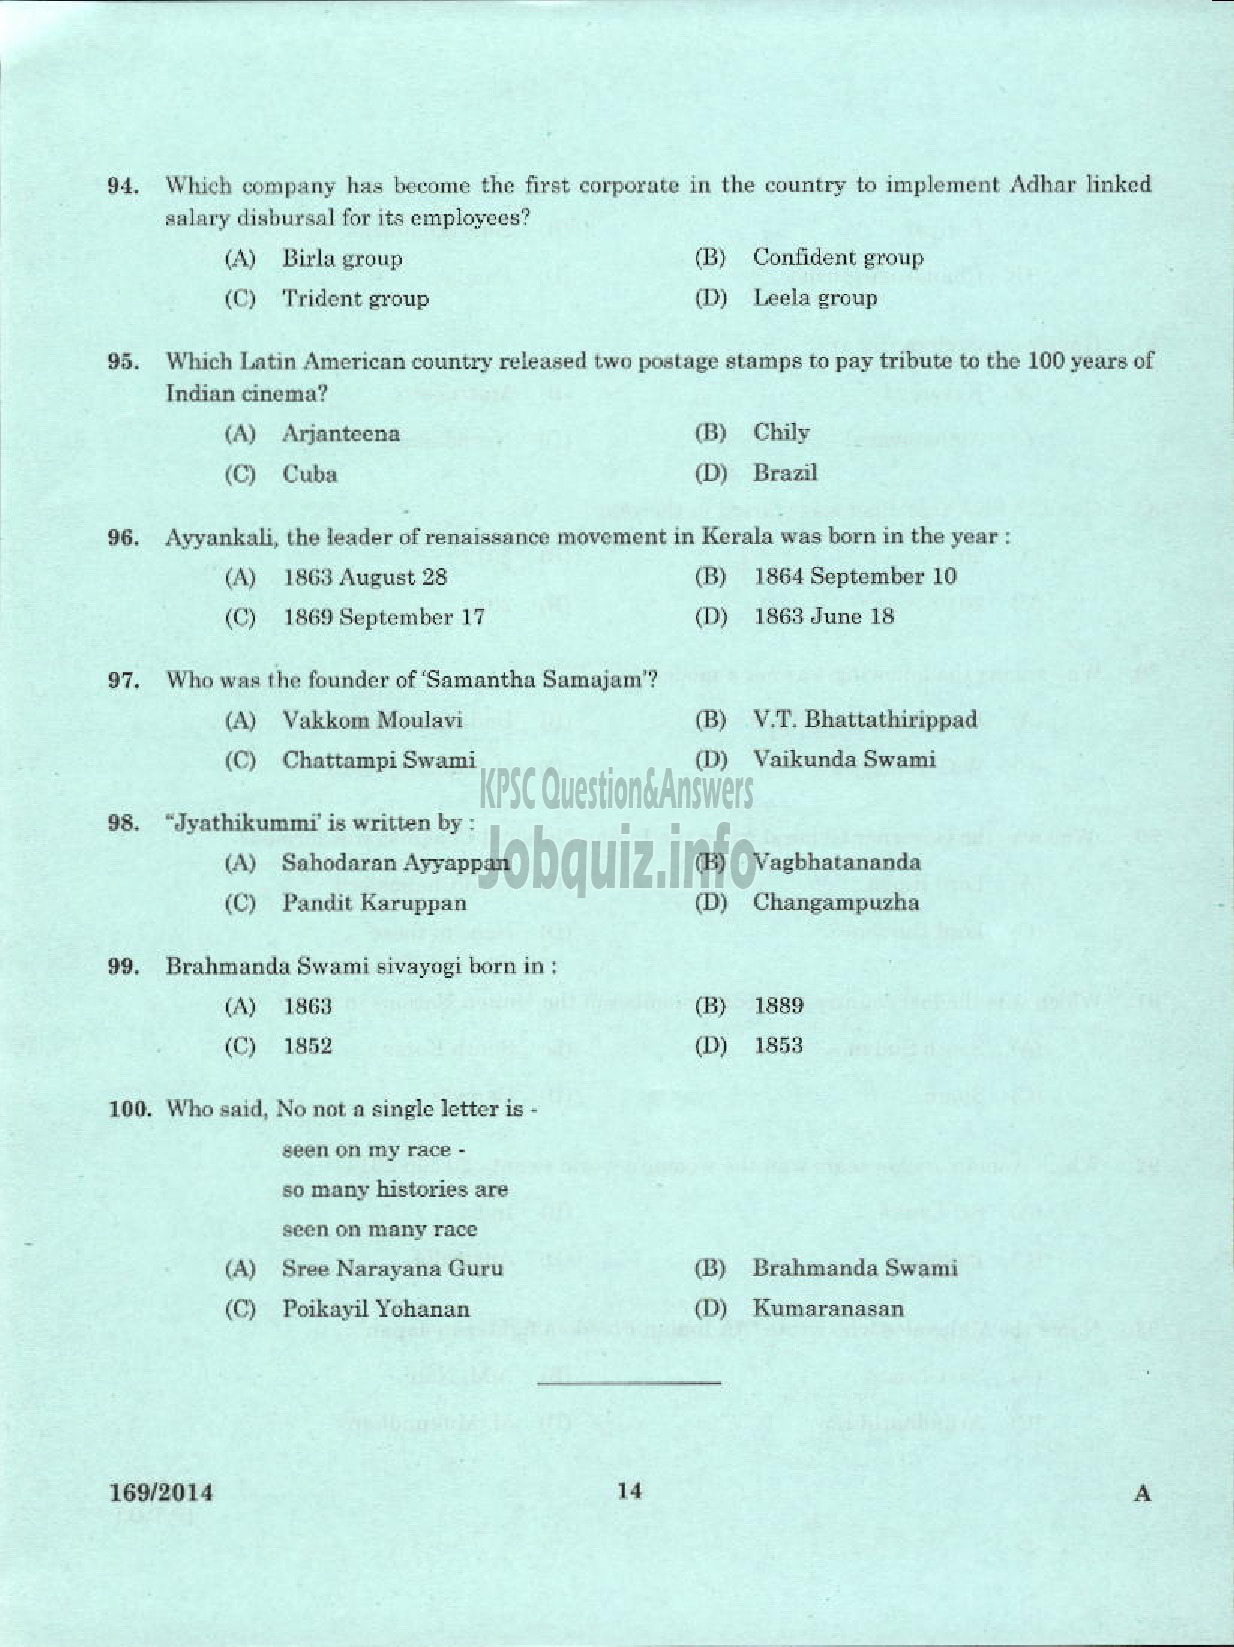 Kerala PSC Question Paper - TRADESMAN MOULDING AND FOUNDRY TECHNICAL EDUCATION TVPM PTA KTM AND TSR-12